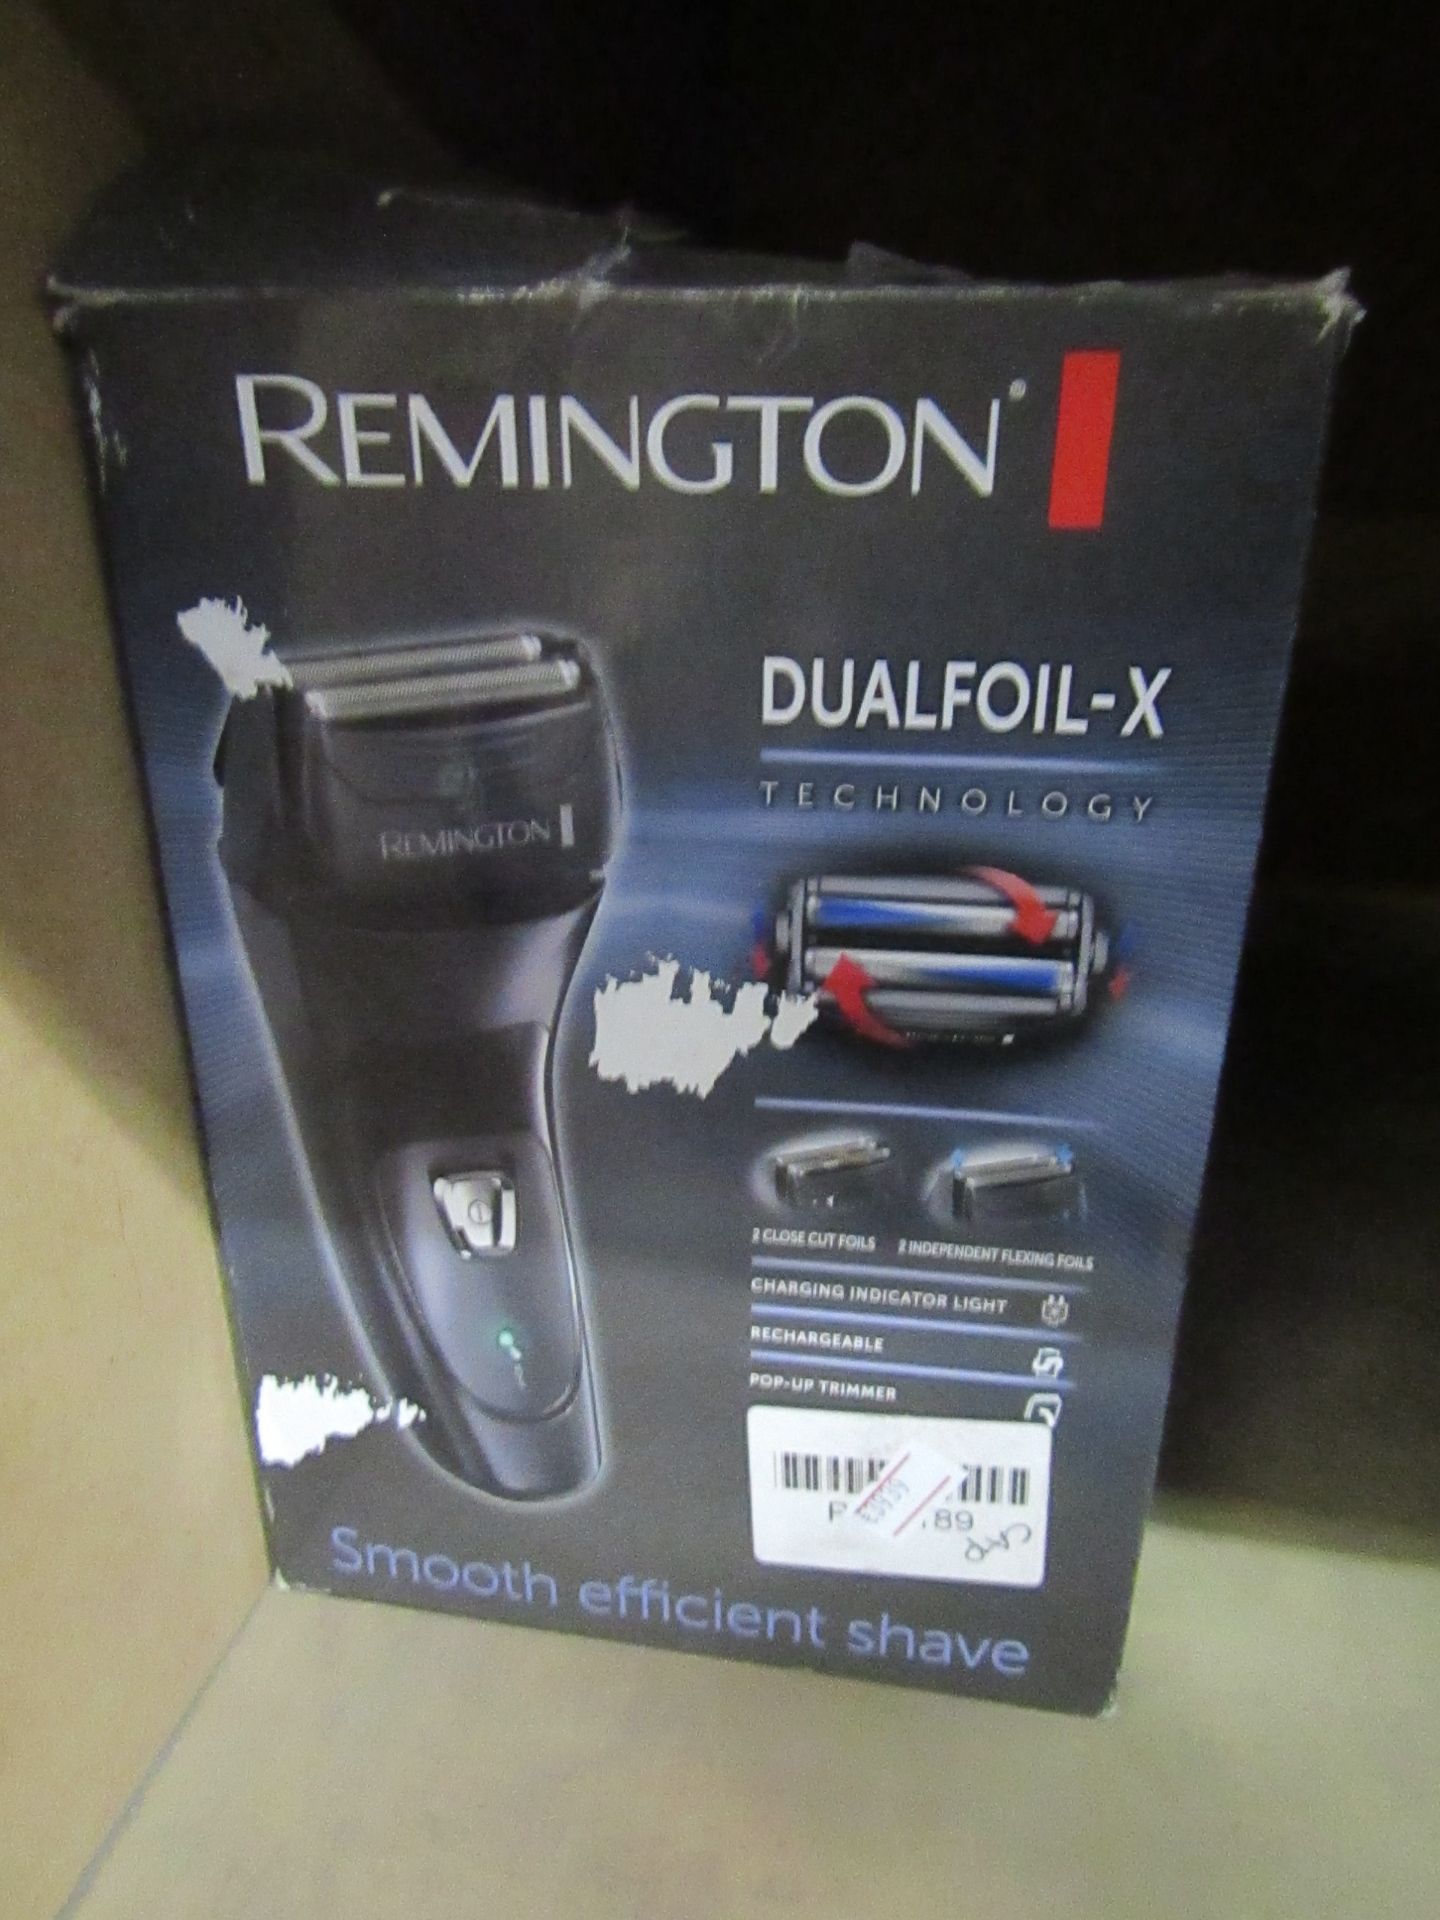 Remington dual -foilx shaver tested working and boxed